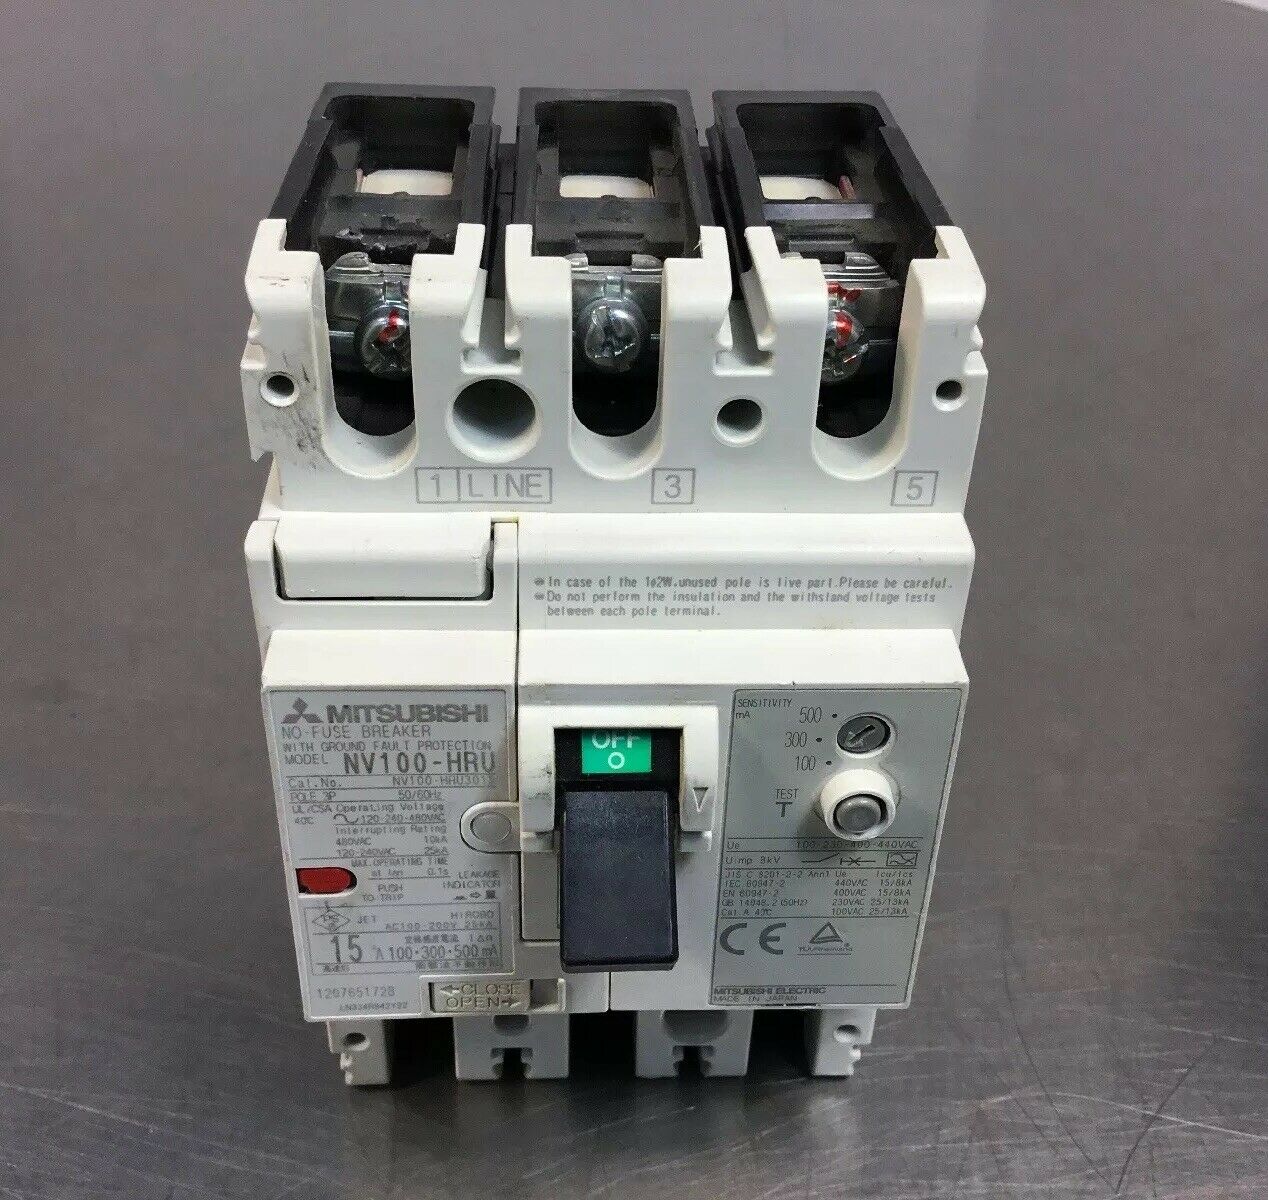 Mitsubishi NV100-HRU3015 Circuit Breaker 15A with Ground Fault Protection    4D